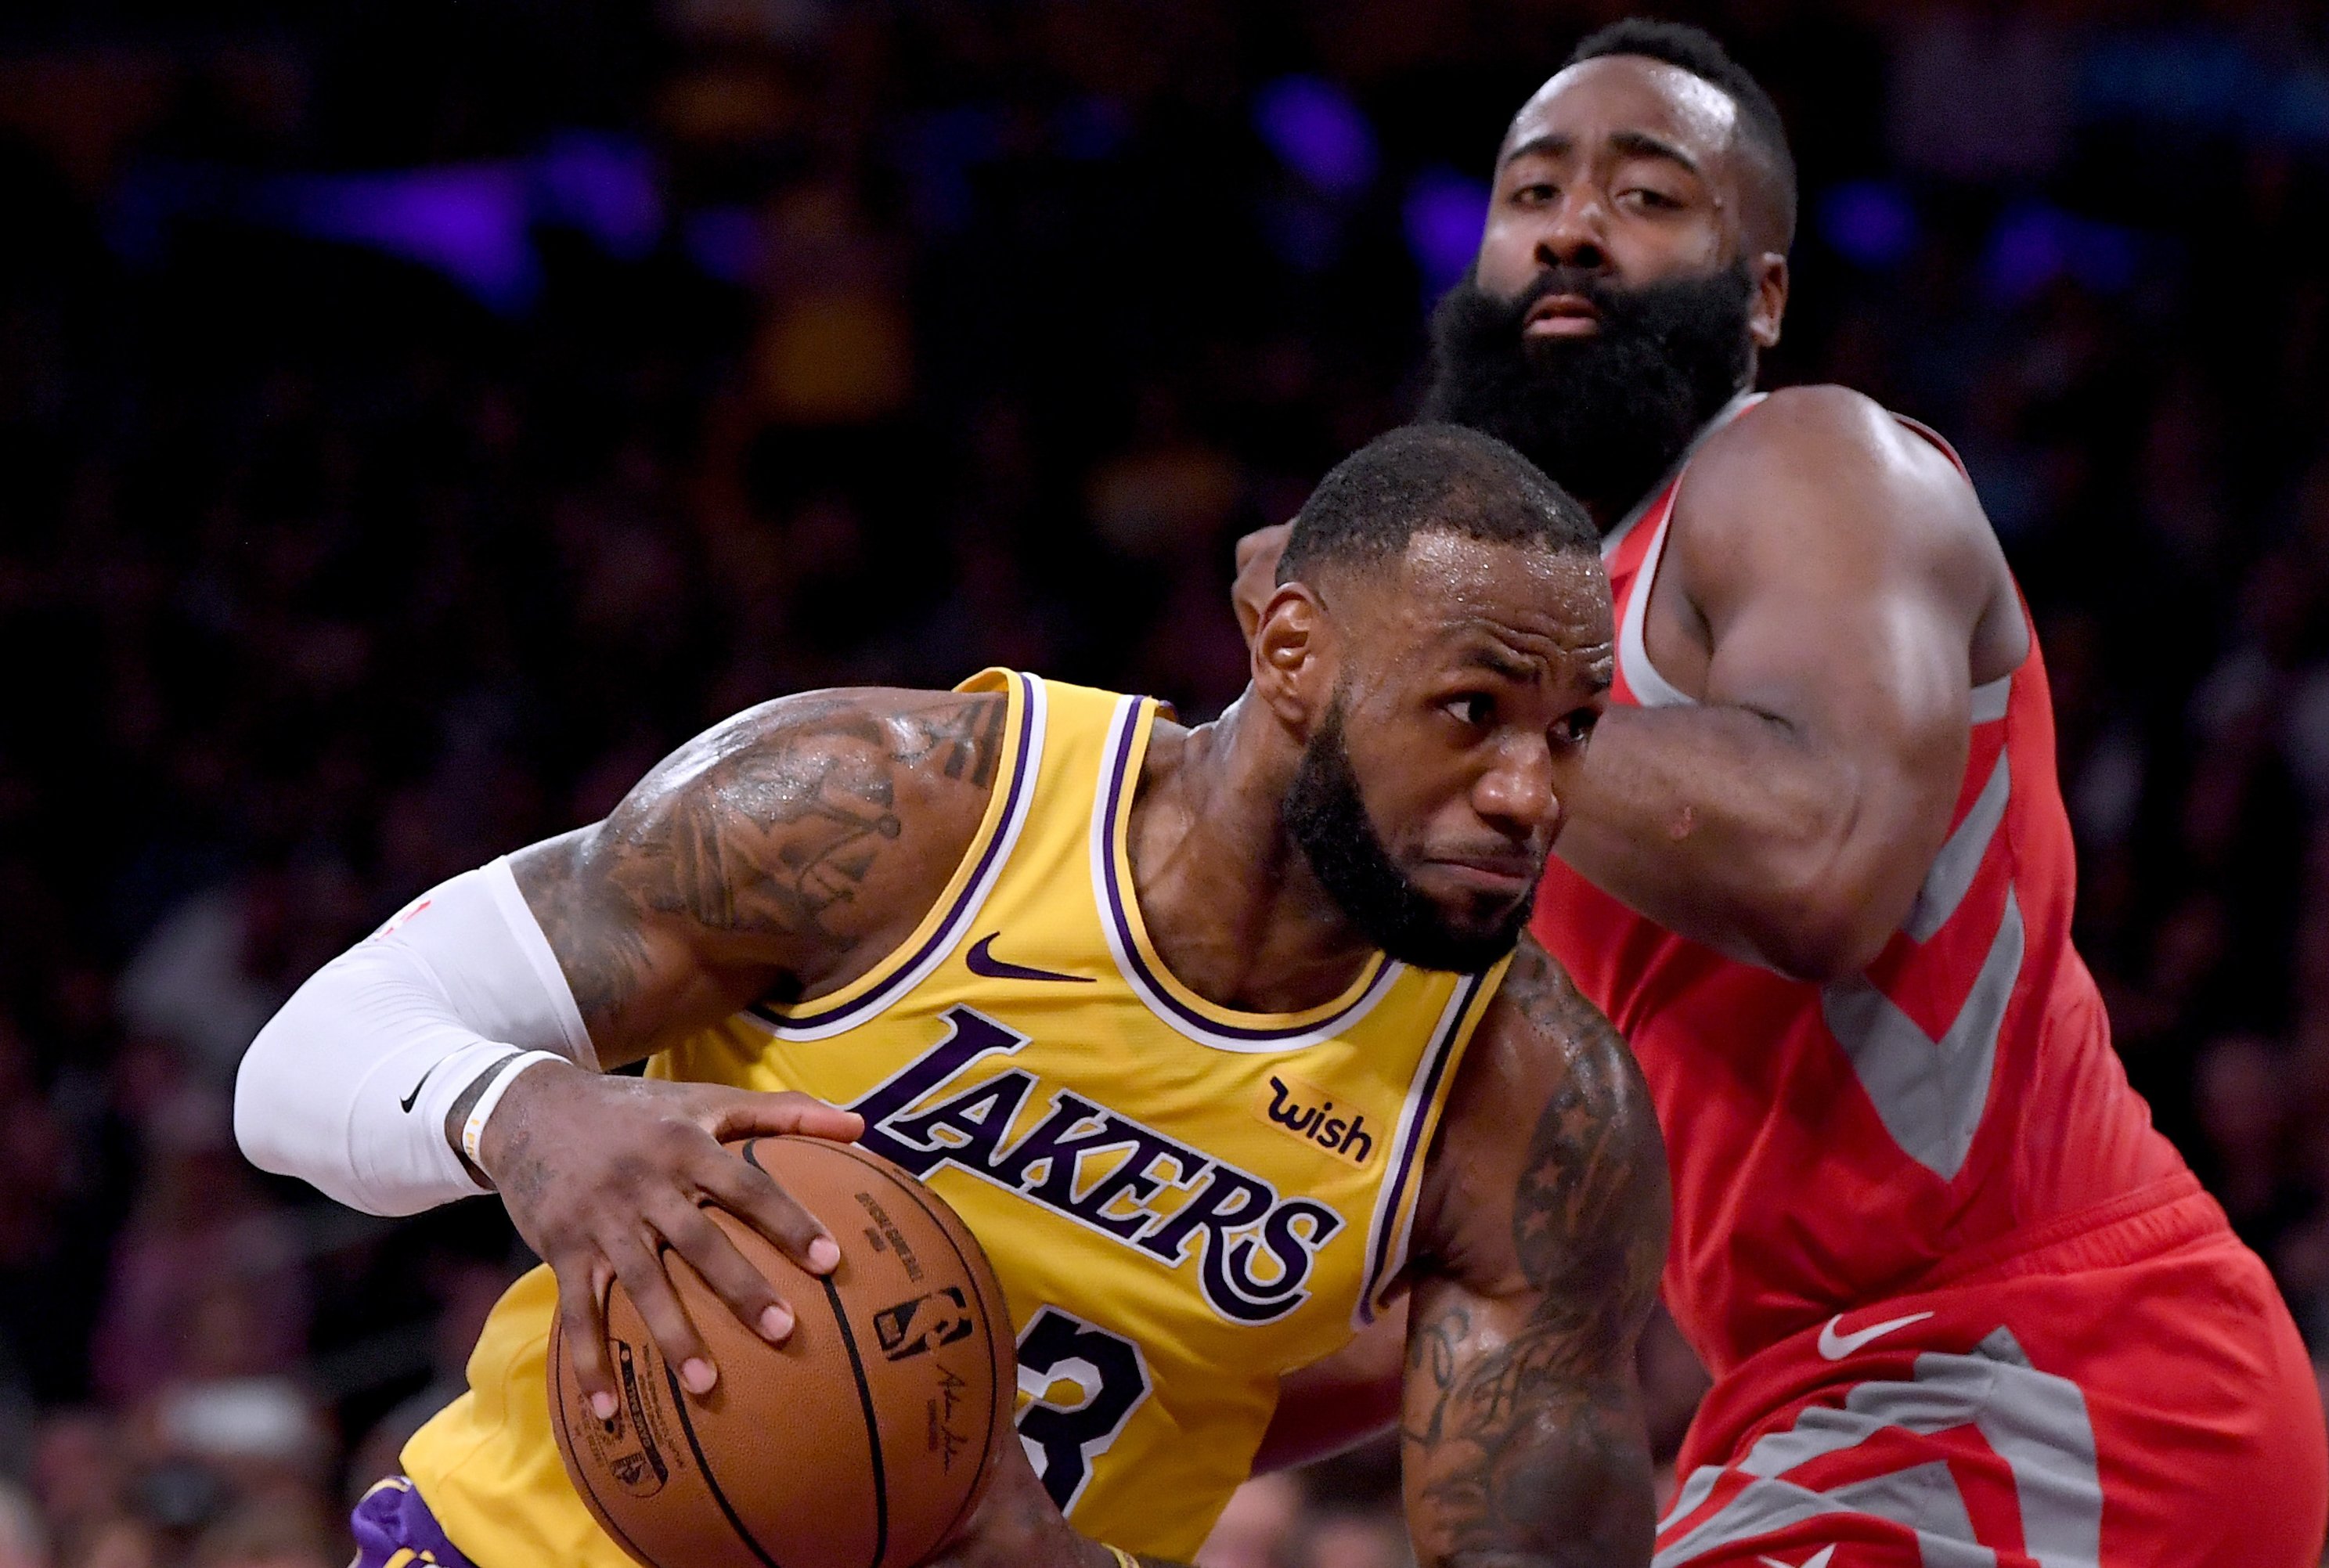 LeBron James denies Lakers frustration: 'My patience isn't waning